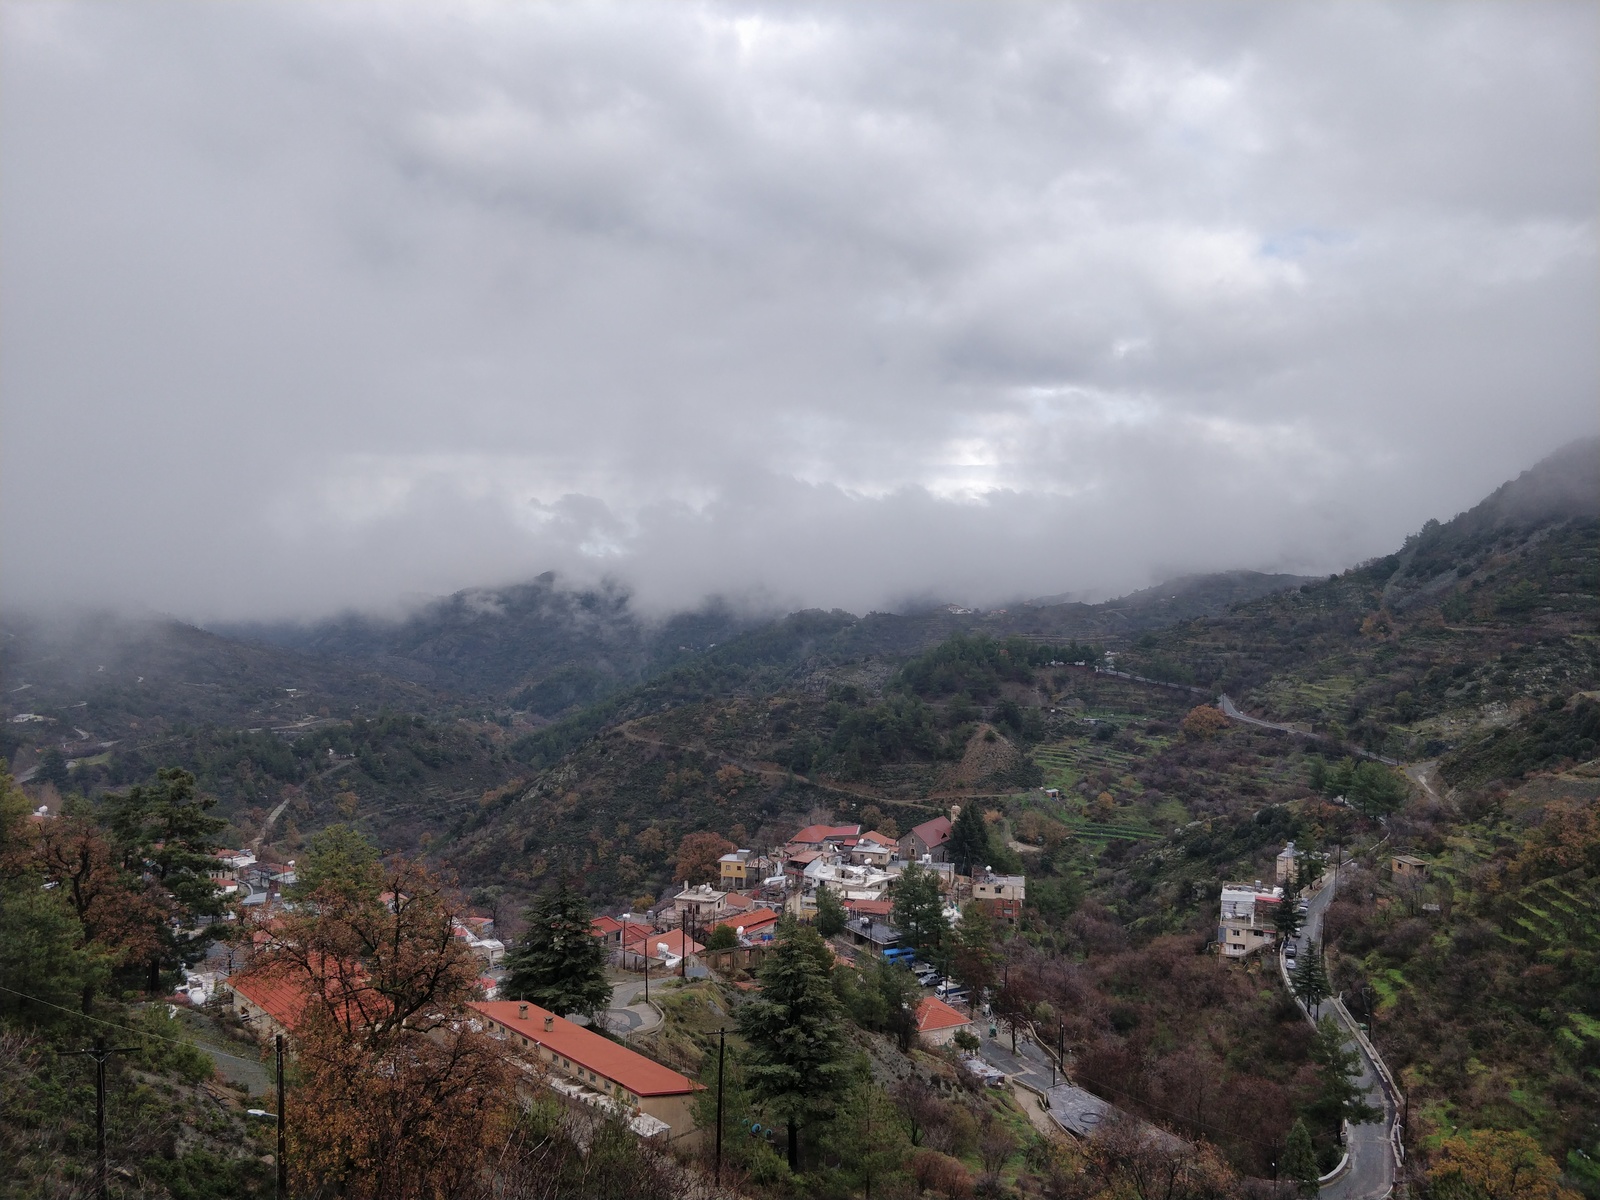 January 1 in the mountains of Cyprus. - Cyprus, The mountains, Clouds, Fog, Before, After